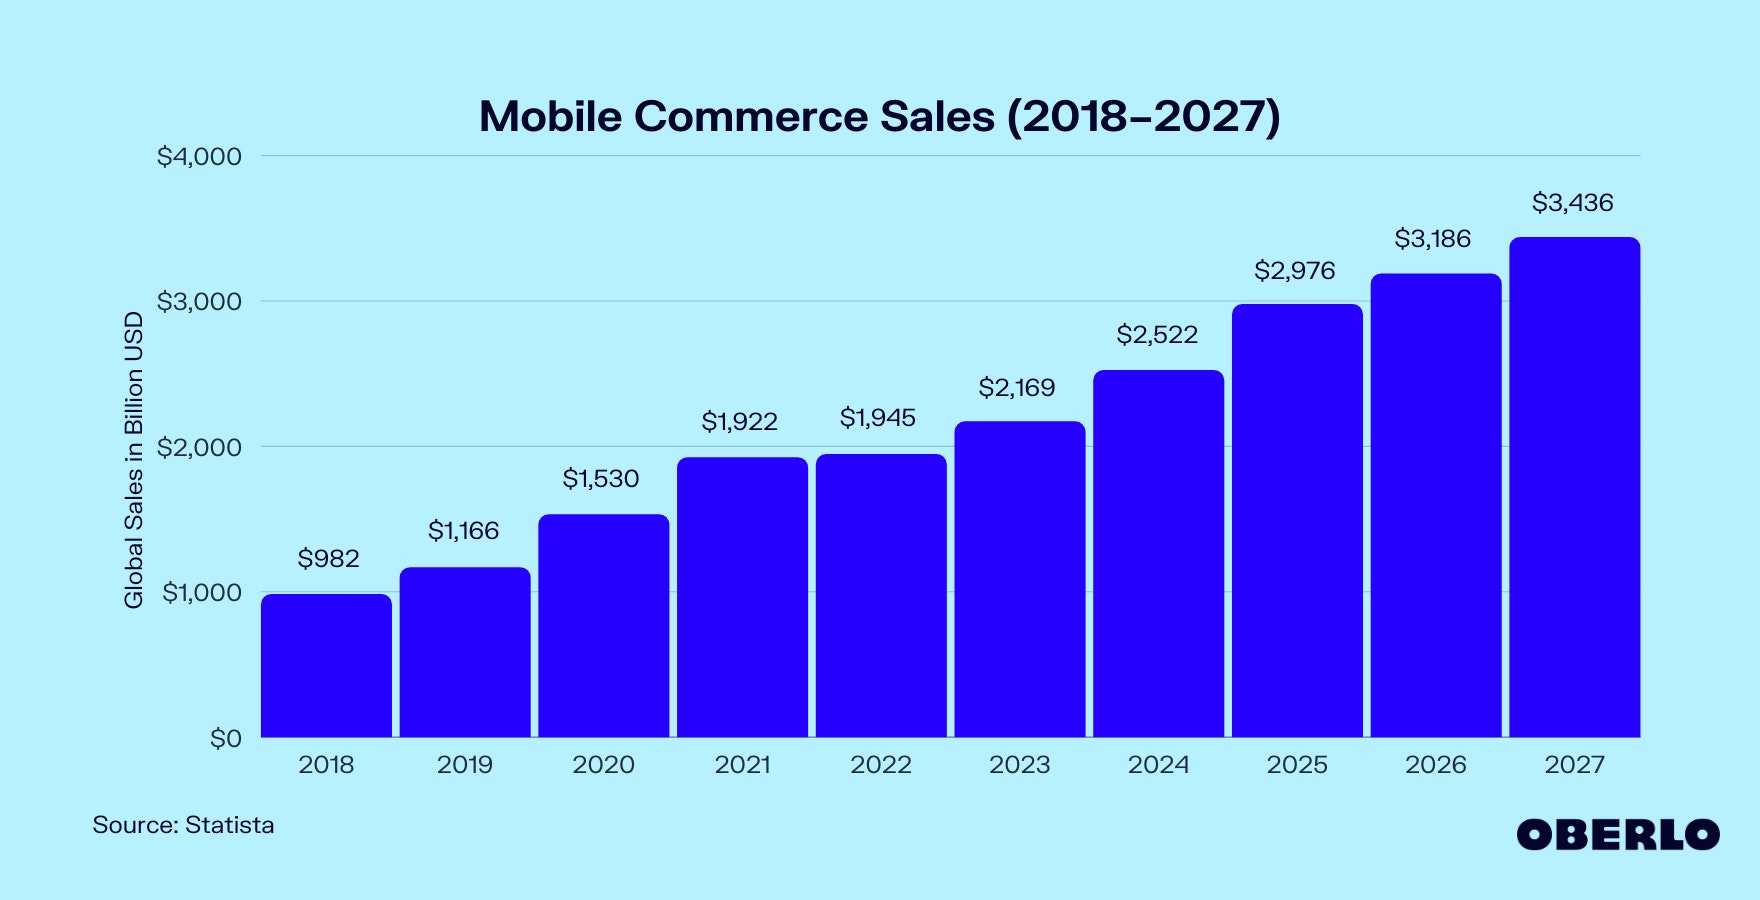 Mobile Commerce Sales in 2021